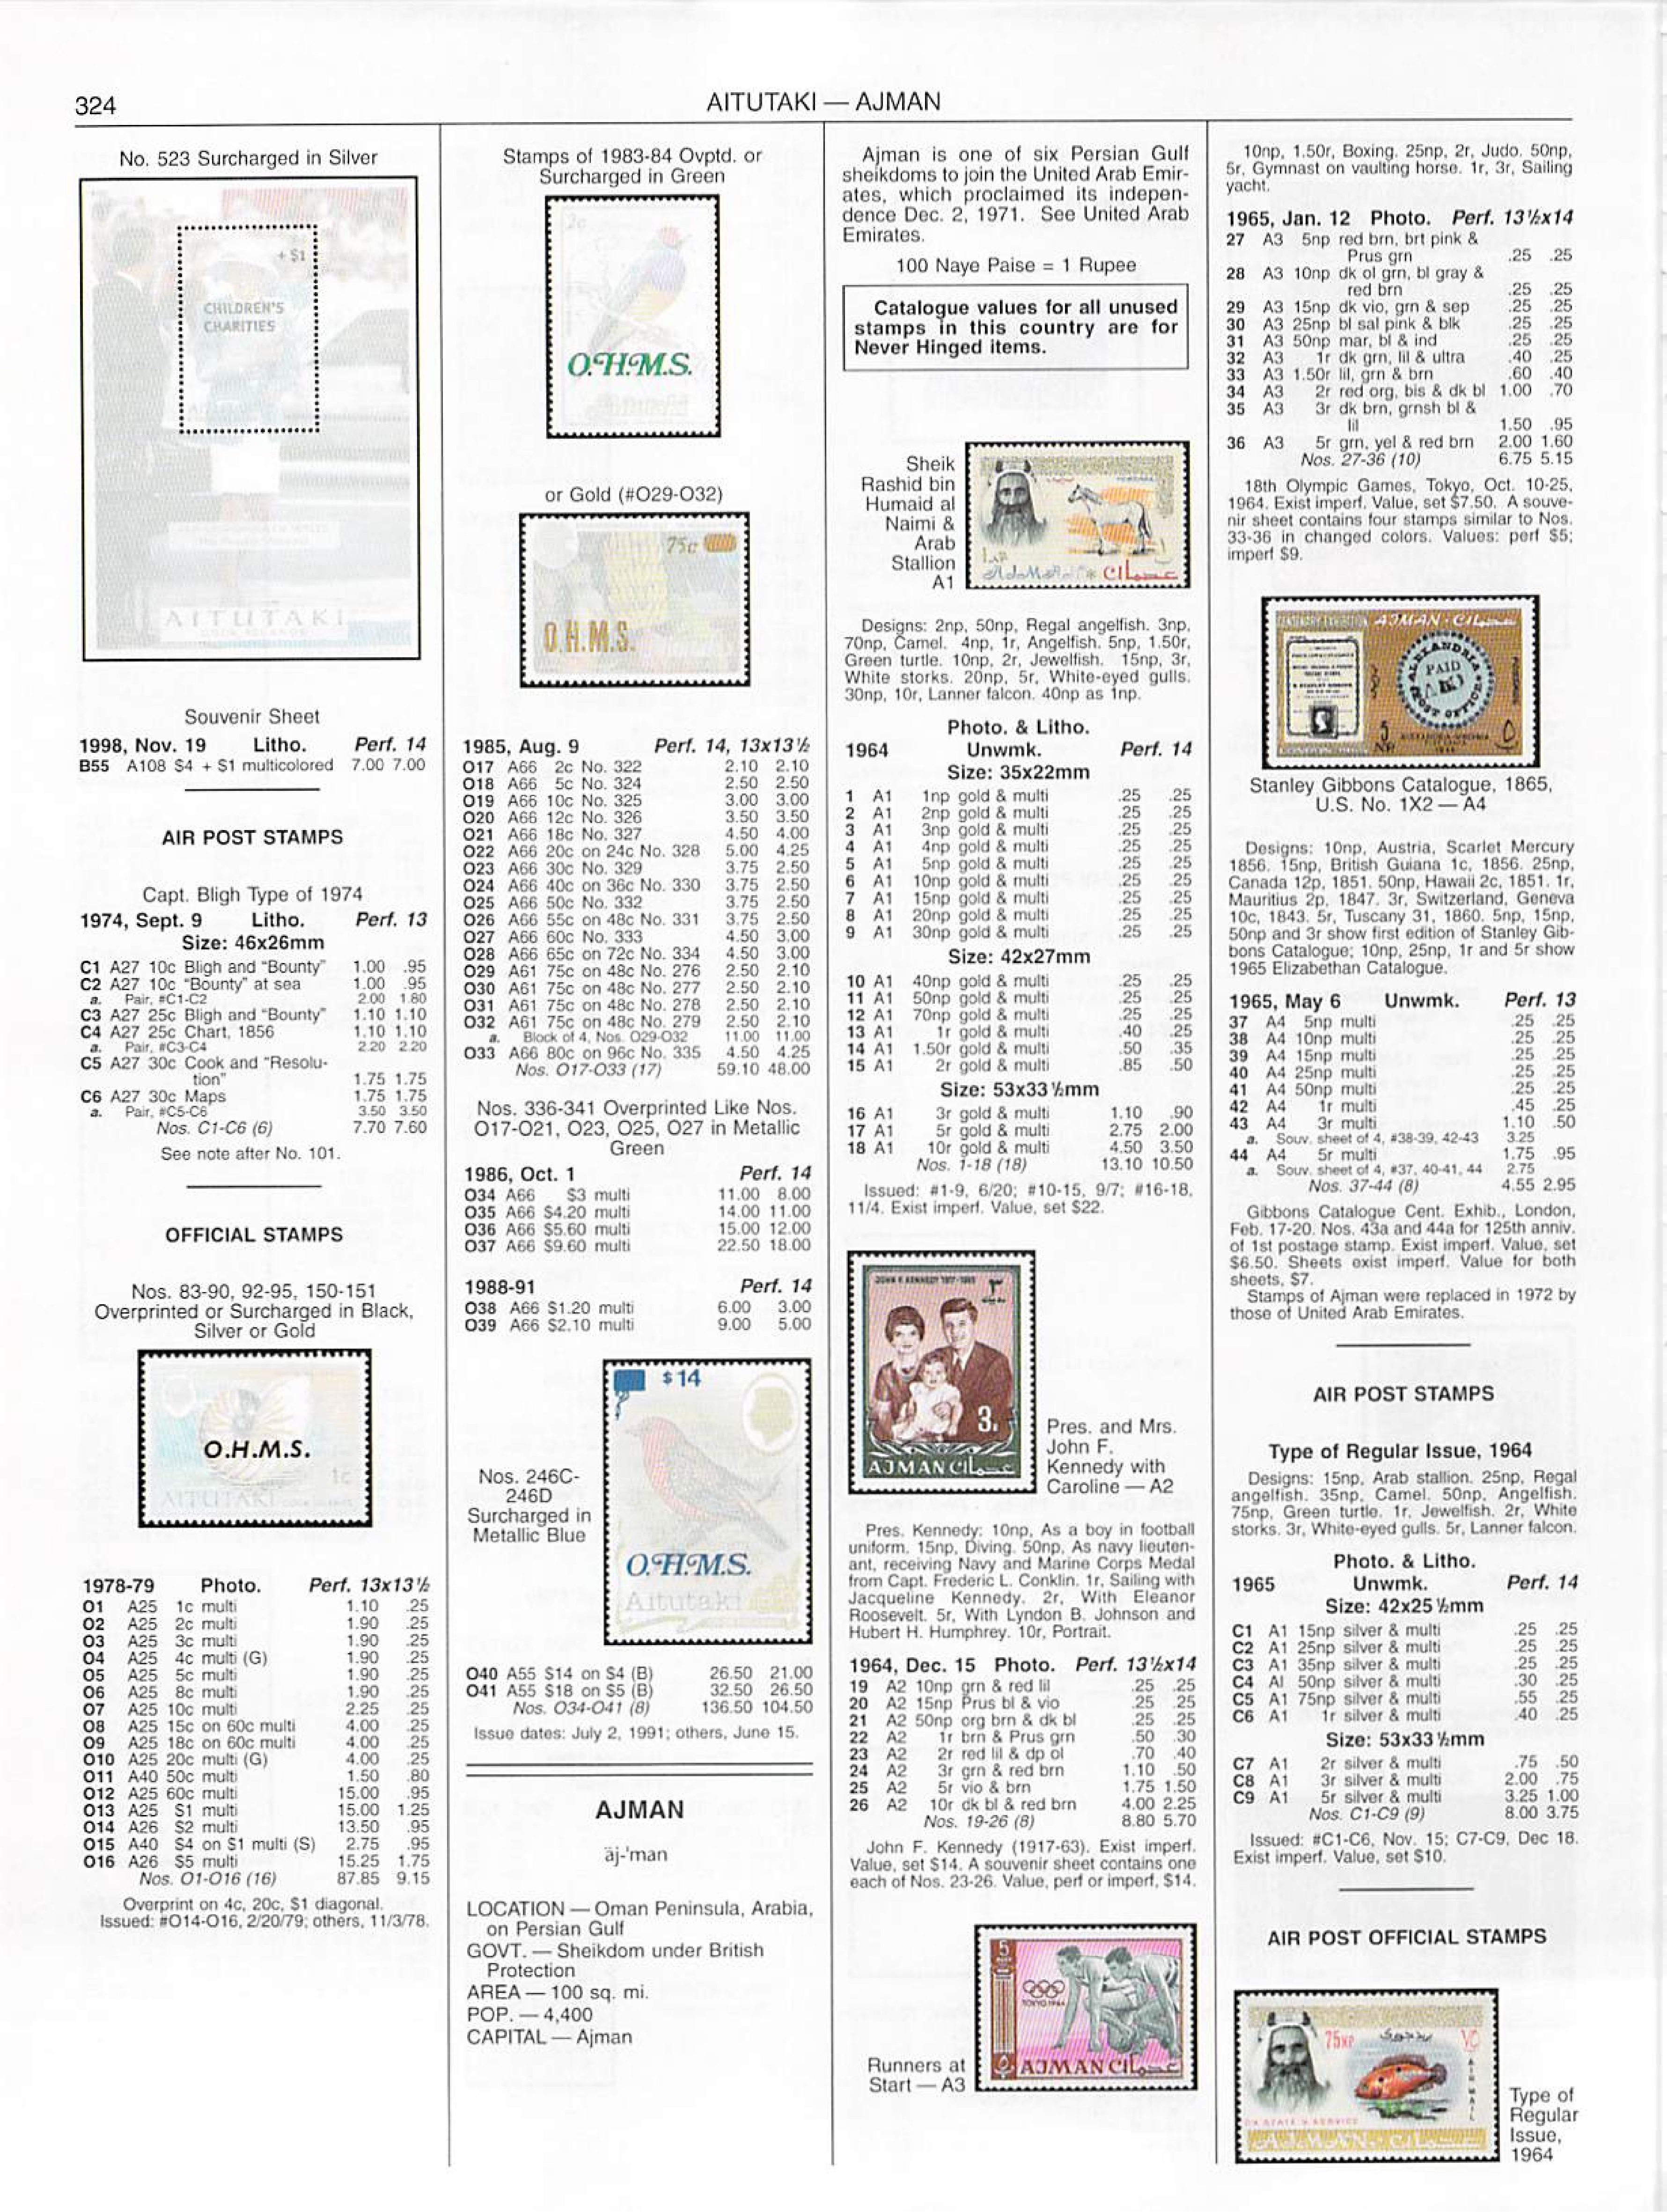 Scott catalogue listing for Ajman, including the 1965 Stanley Gibbons anniversary set